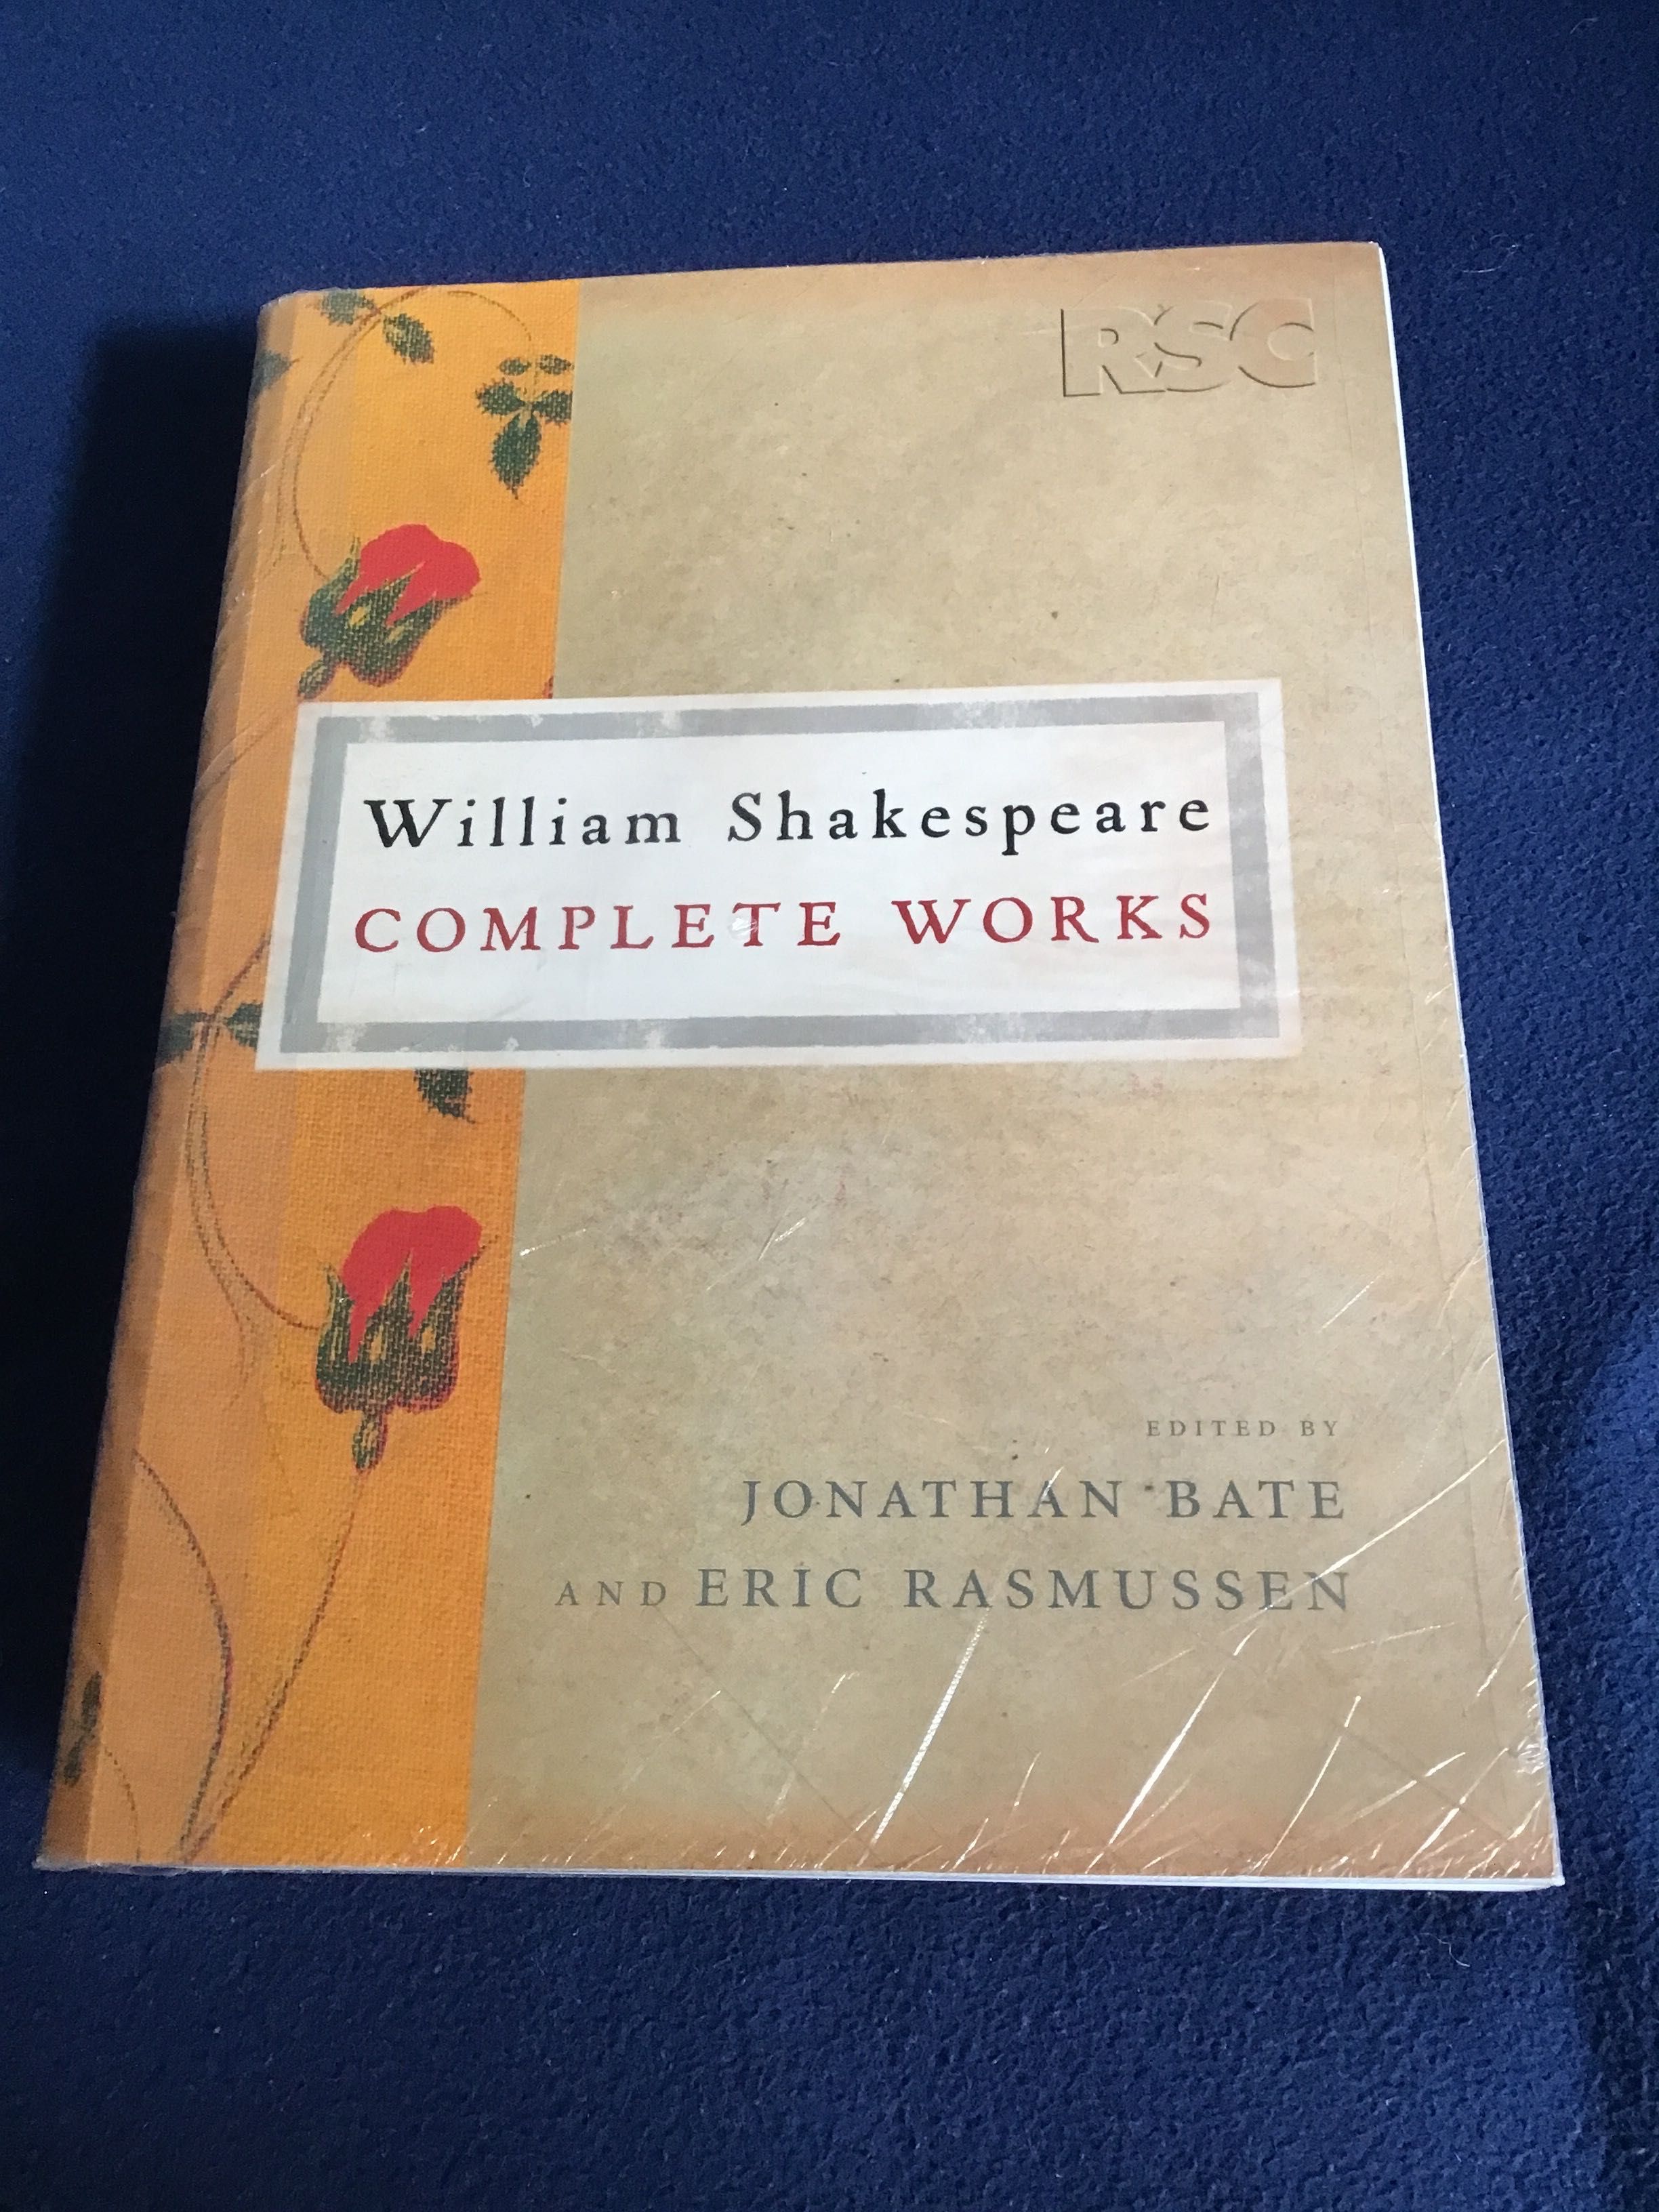 RSC Shakespeare - Complete Works